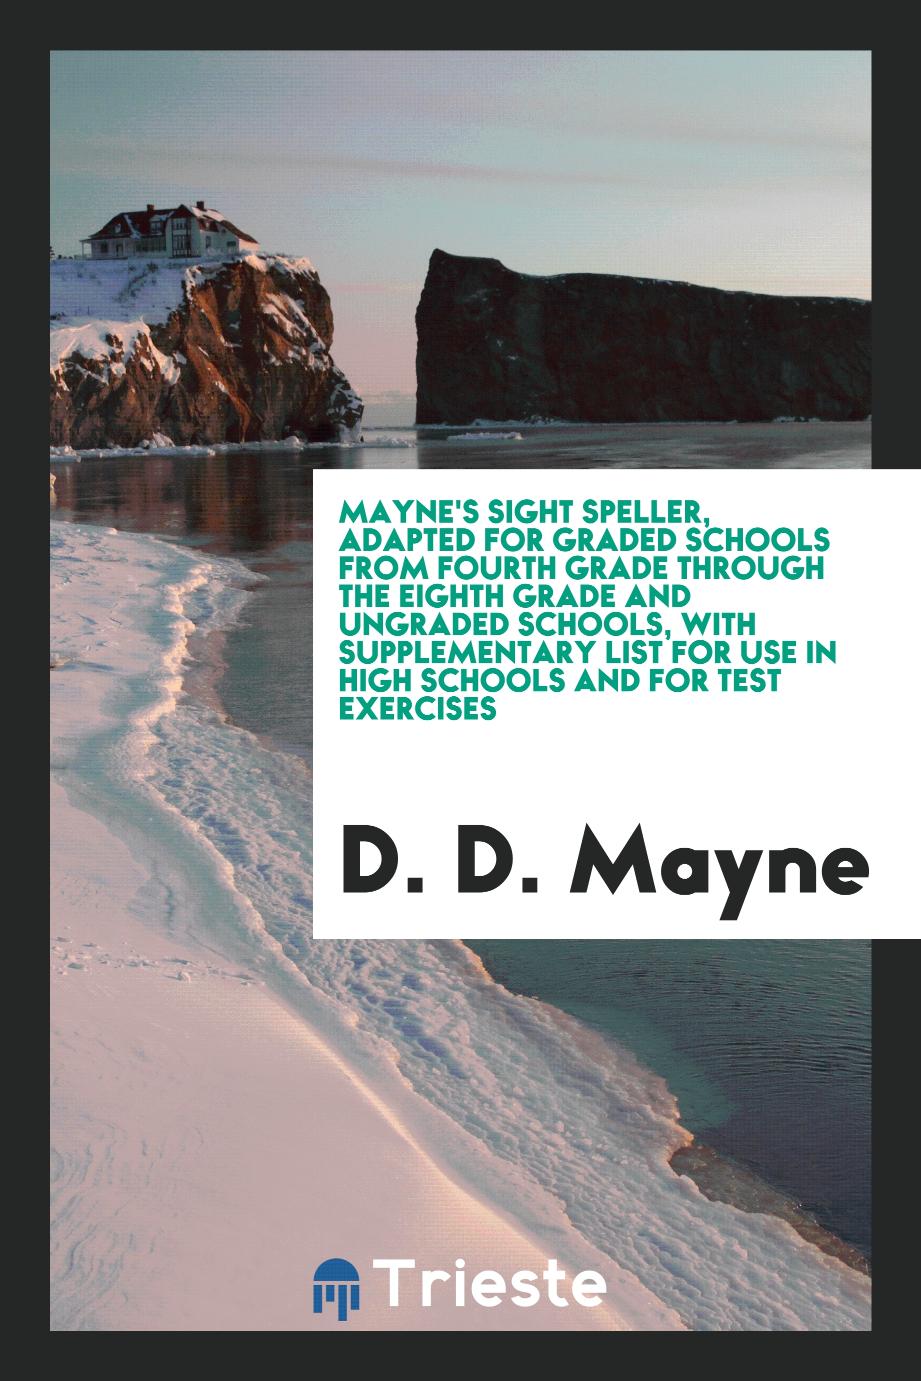 Mayne's sight speller, adapted for graded schools from fourth grade through the eighth grade and ungraded schools, with supplementary list for use in high schools and for test exercises